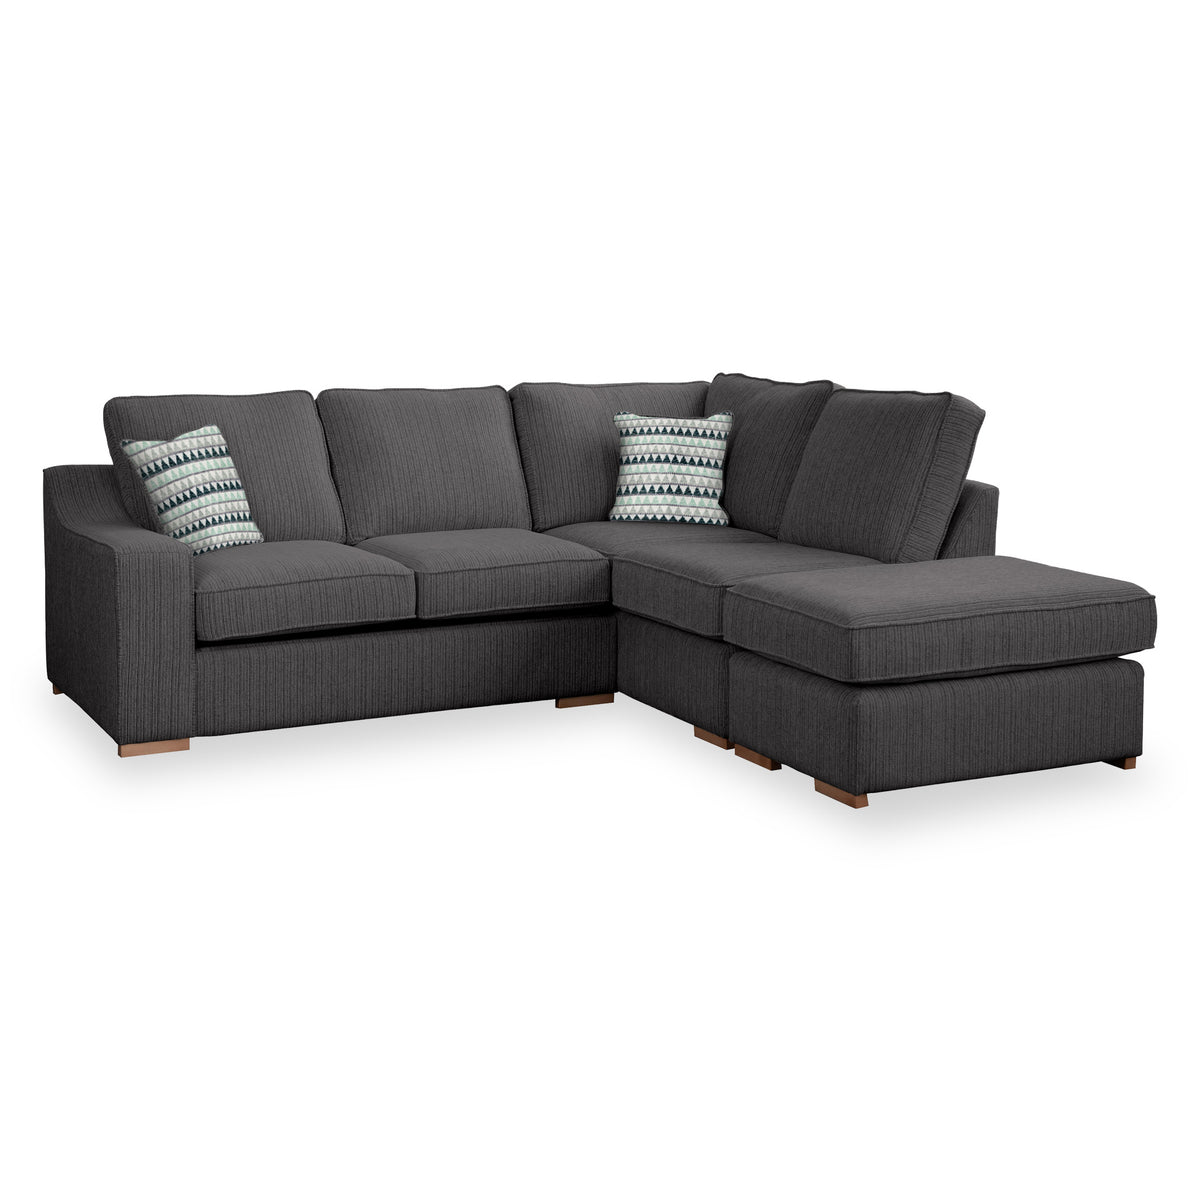 Ashow Charcoal Right Hand Corner Sofabed with Maika Jade Scatter Cushions from Roseland furniture